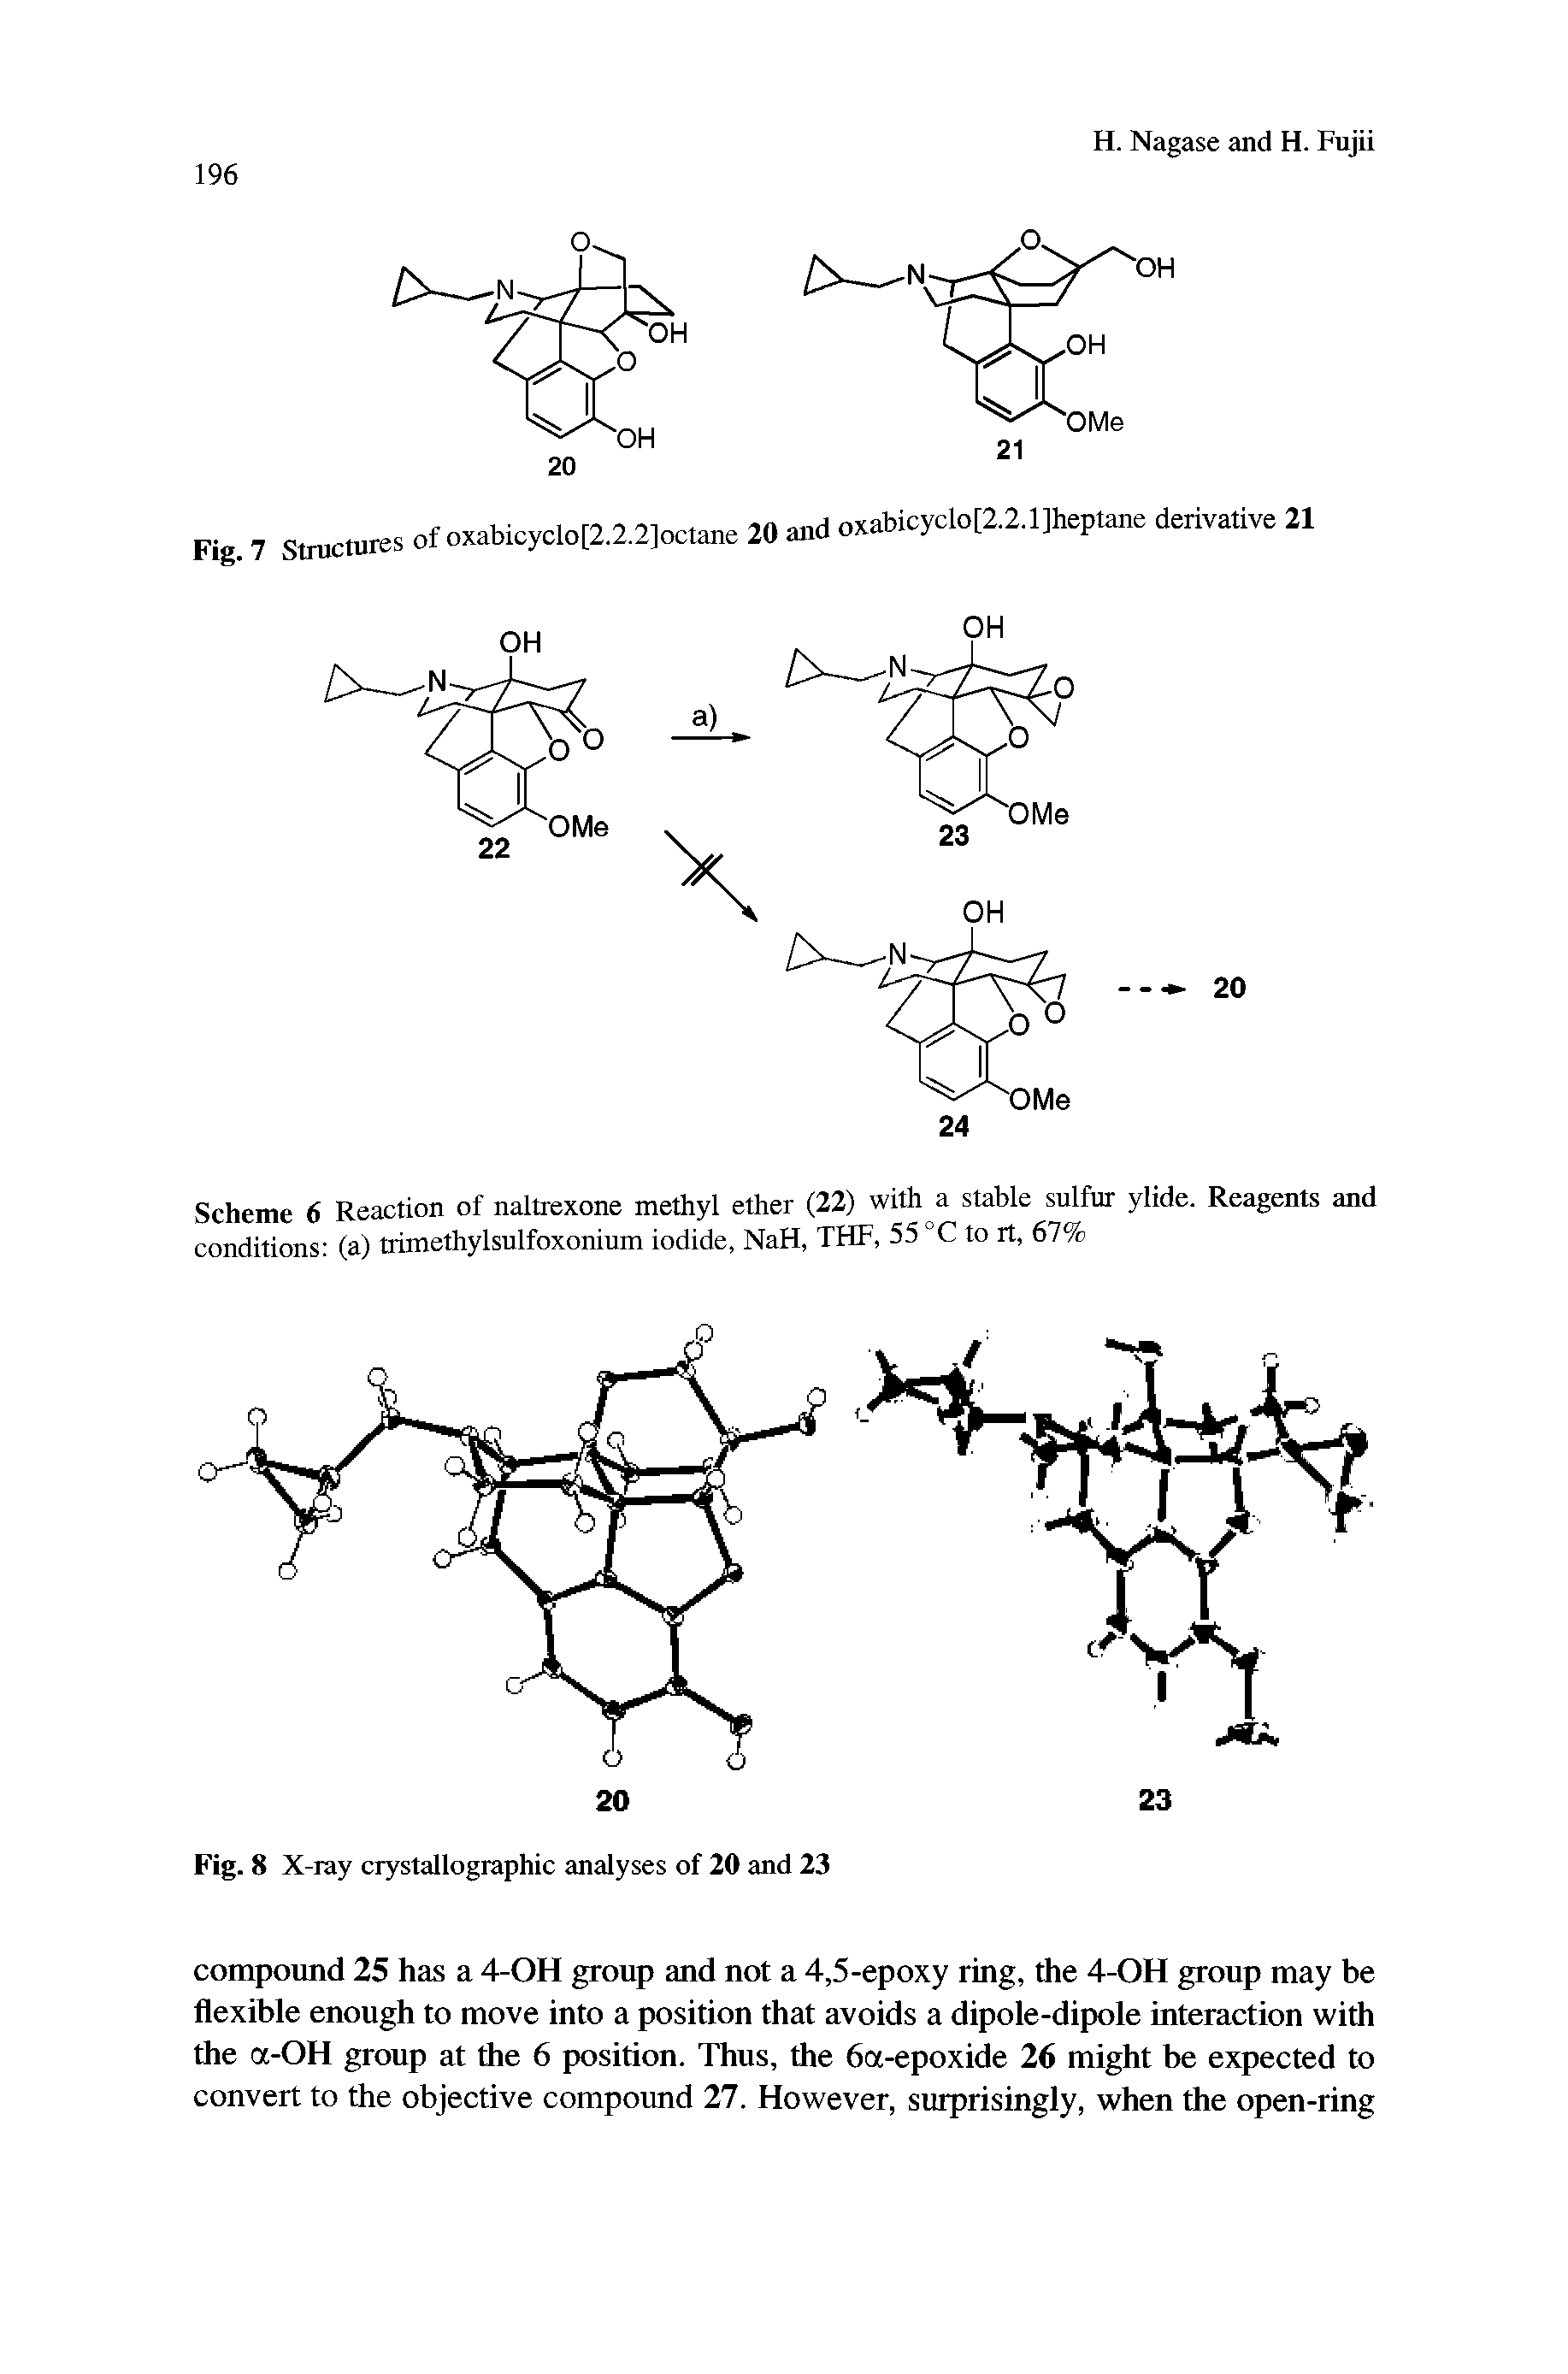 Scheme 6 Reaction of naltrexone methyl ether (22) with a stable sulfur ylide. Reagents and conditions (a) trimethylsulfoxonium iodide, NaH, THF, 55 °C to rt, 67%...